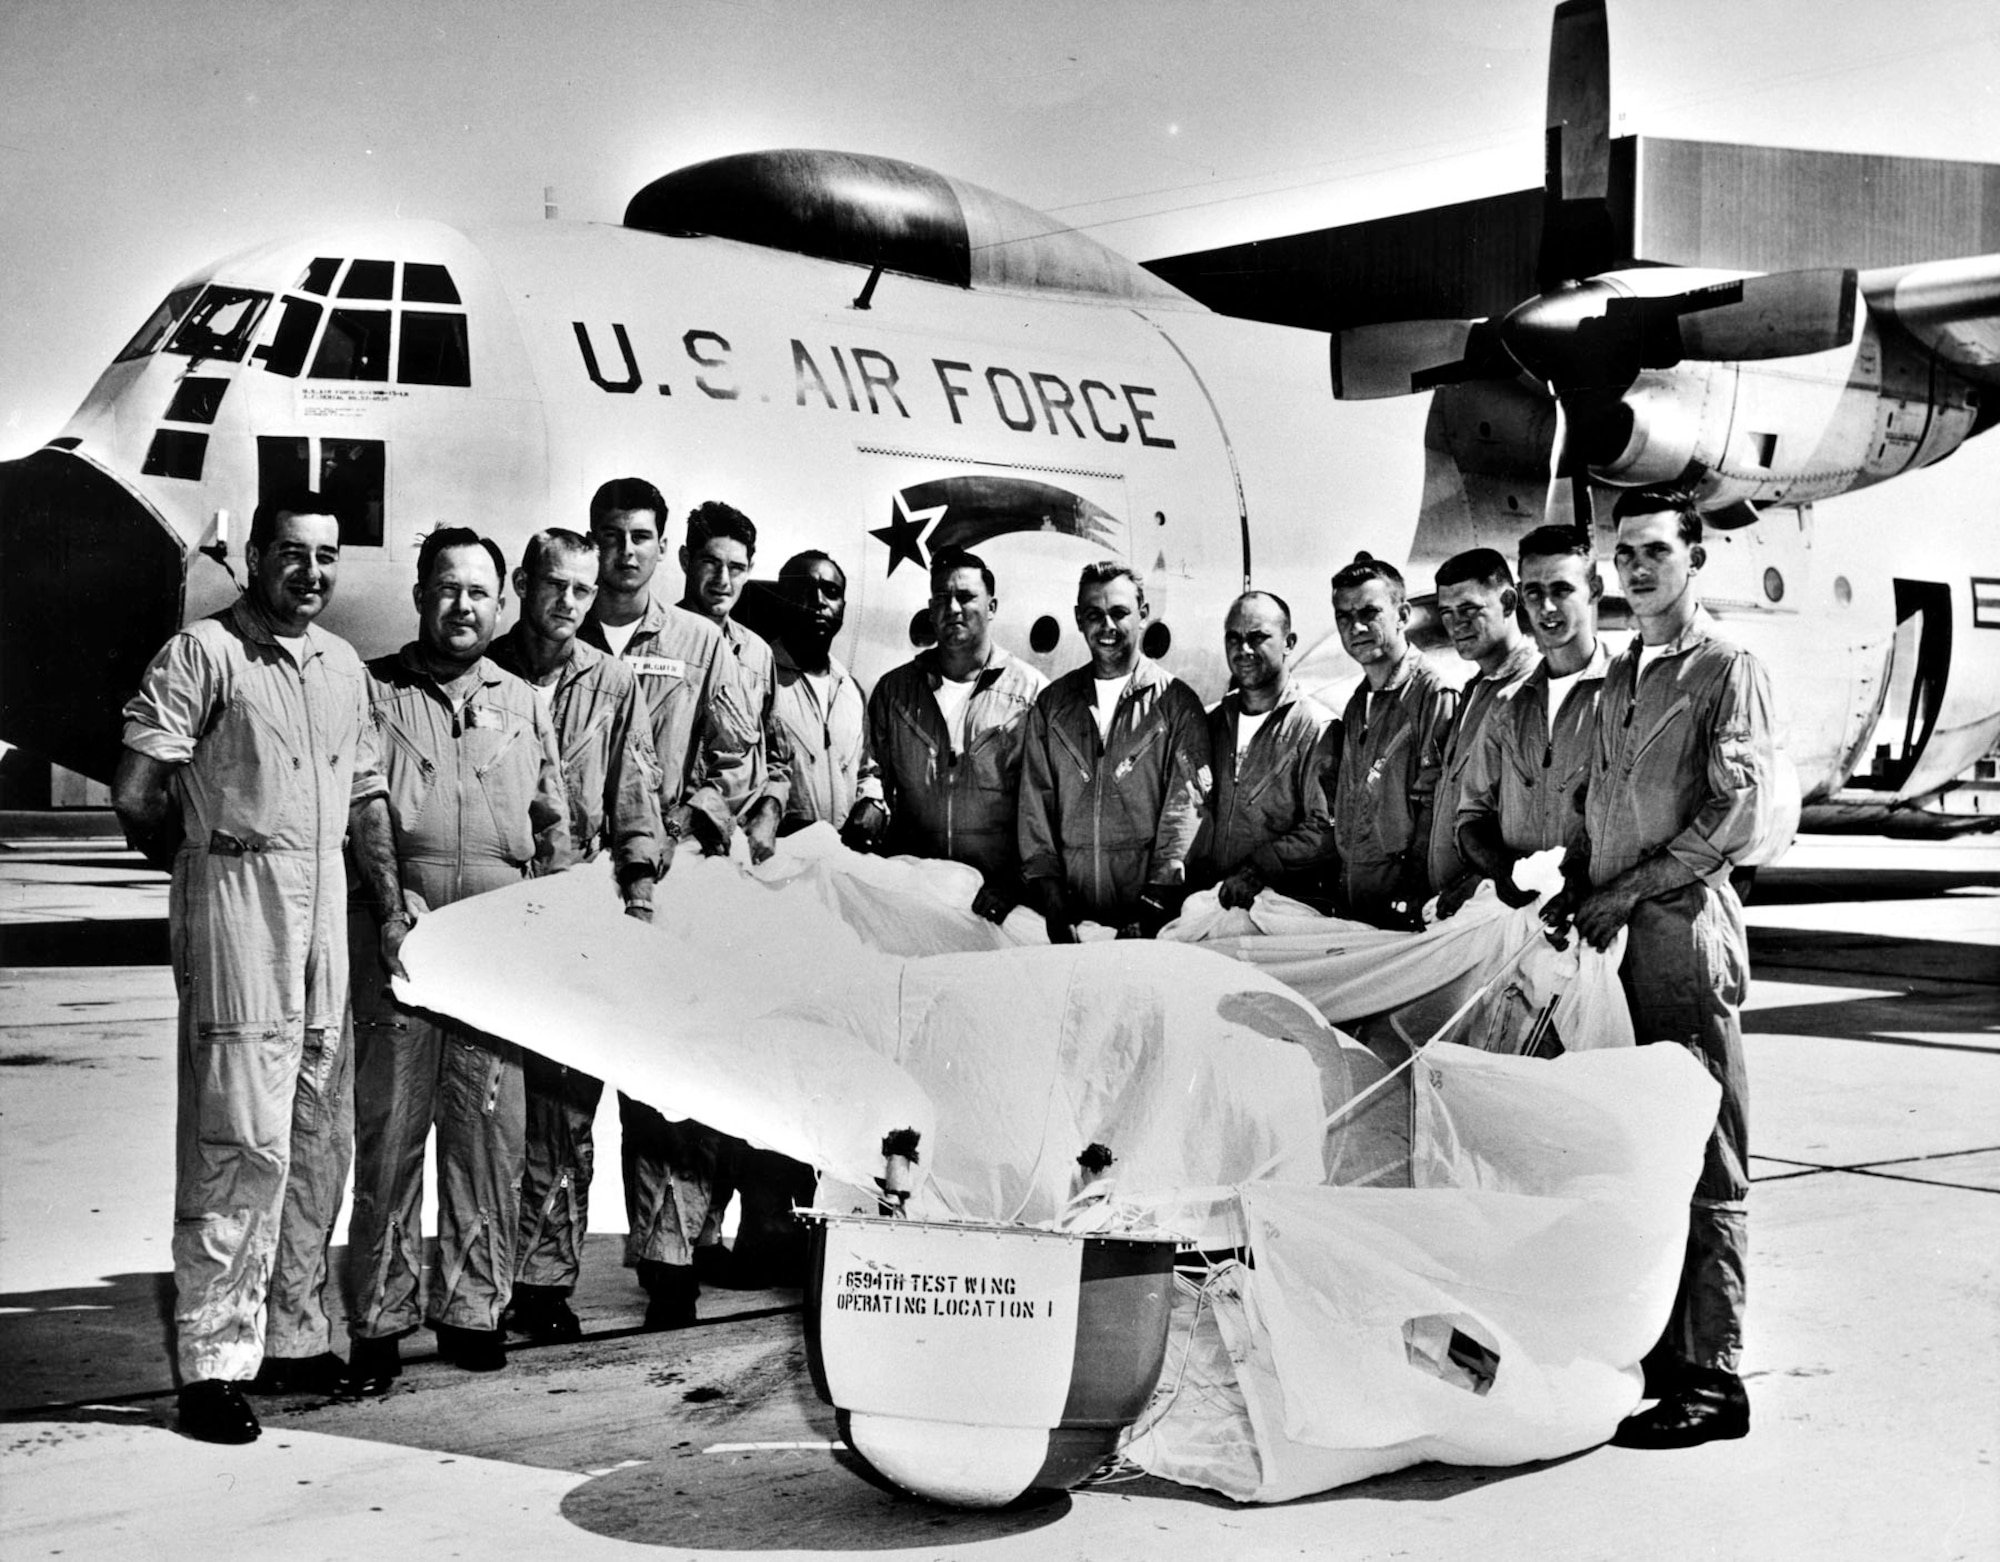 Airmen of the 6594th Test Wing with a practice satellite payload. Note the falling star logo on their JC-130B Hercules aircraft. (U.S. Air Force photo)